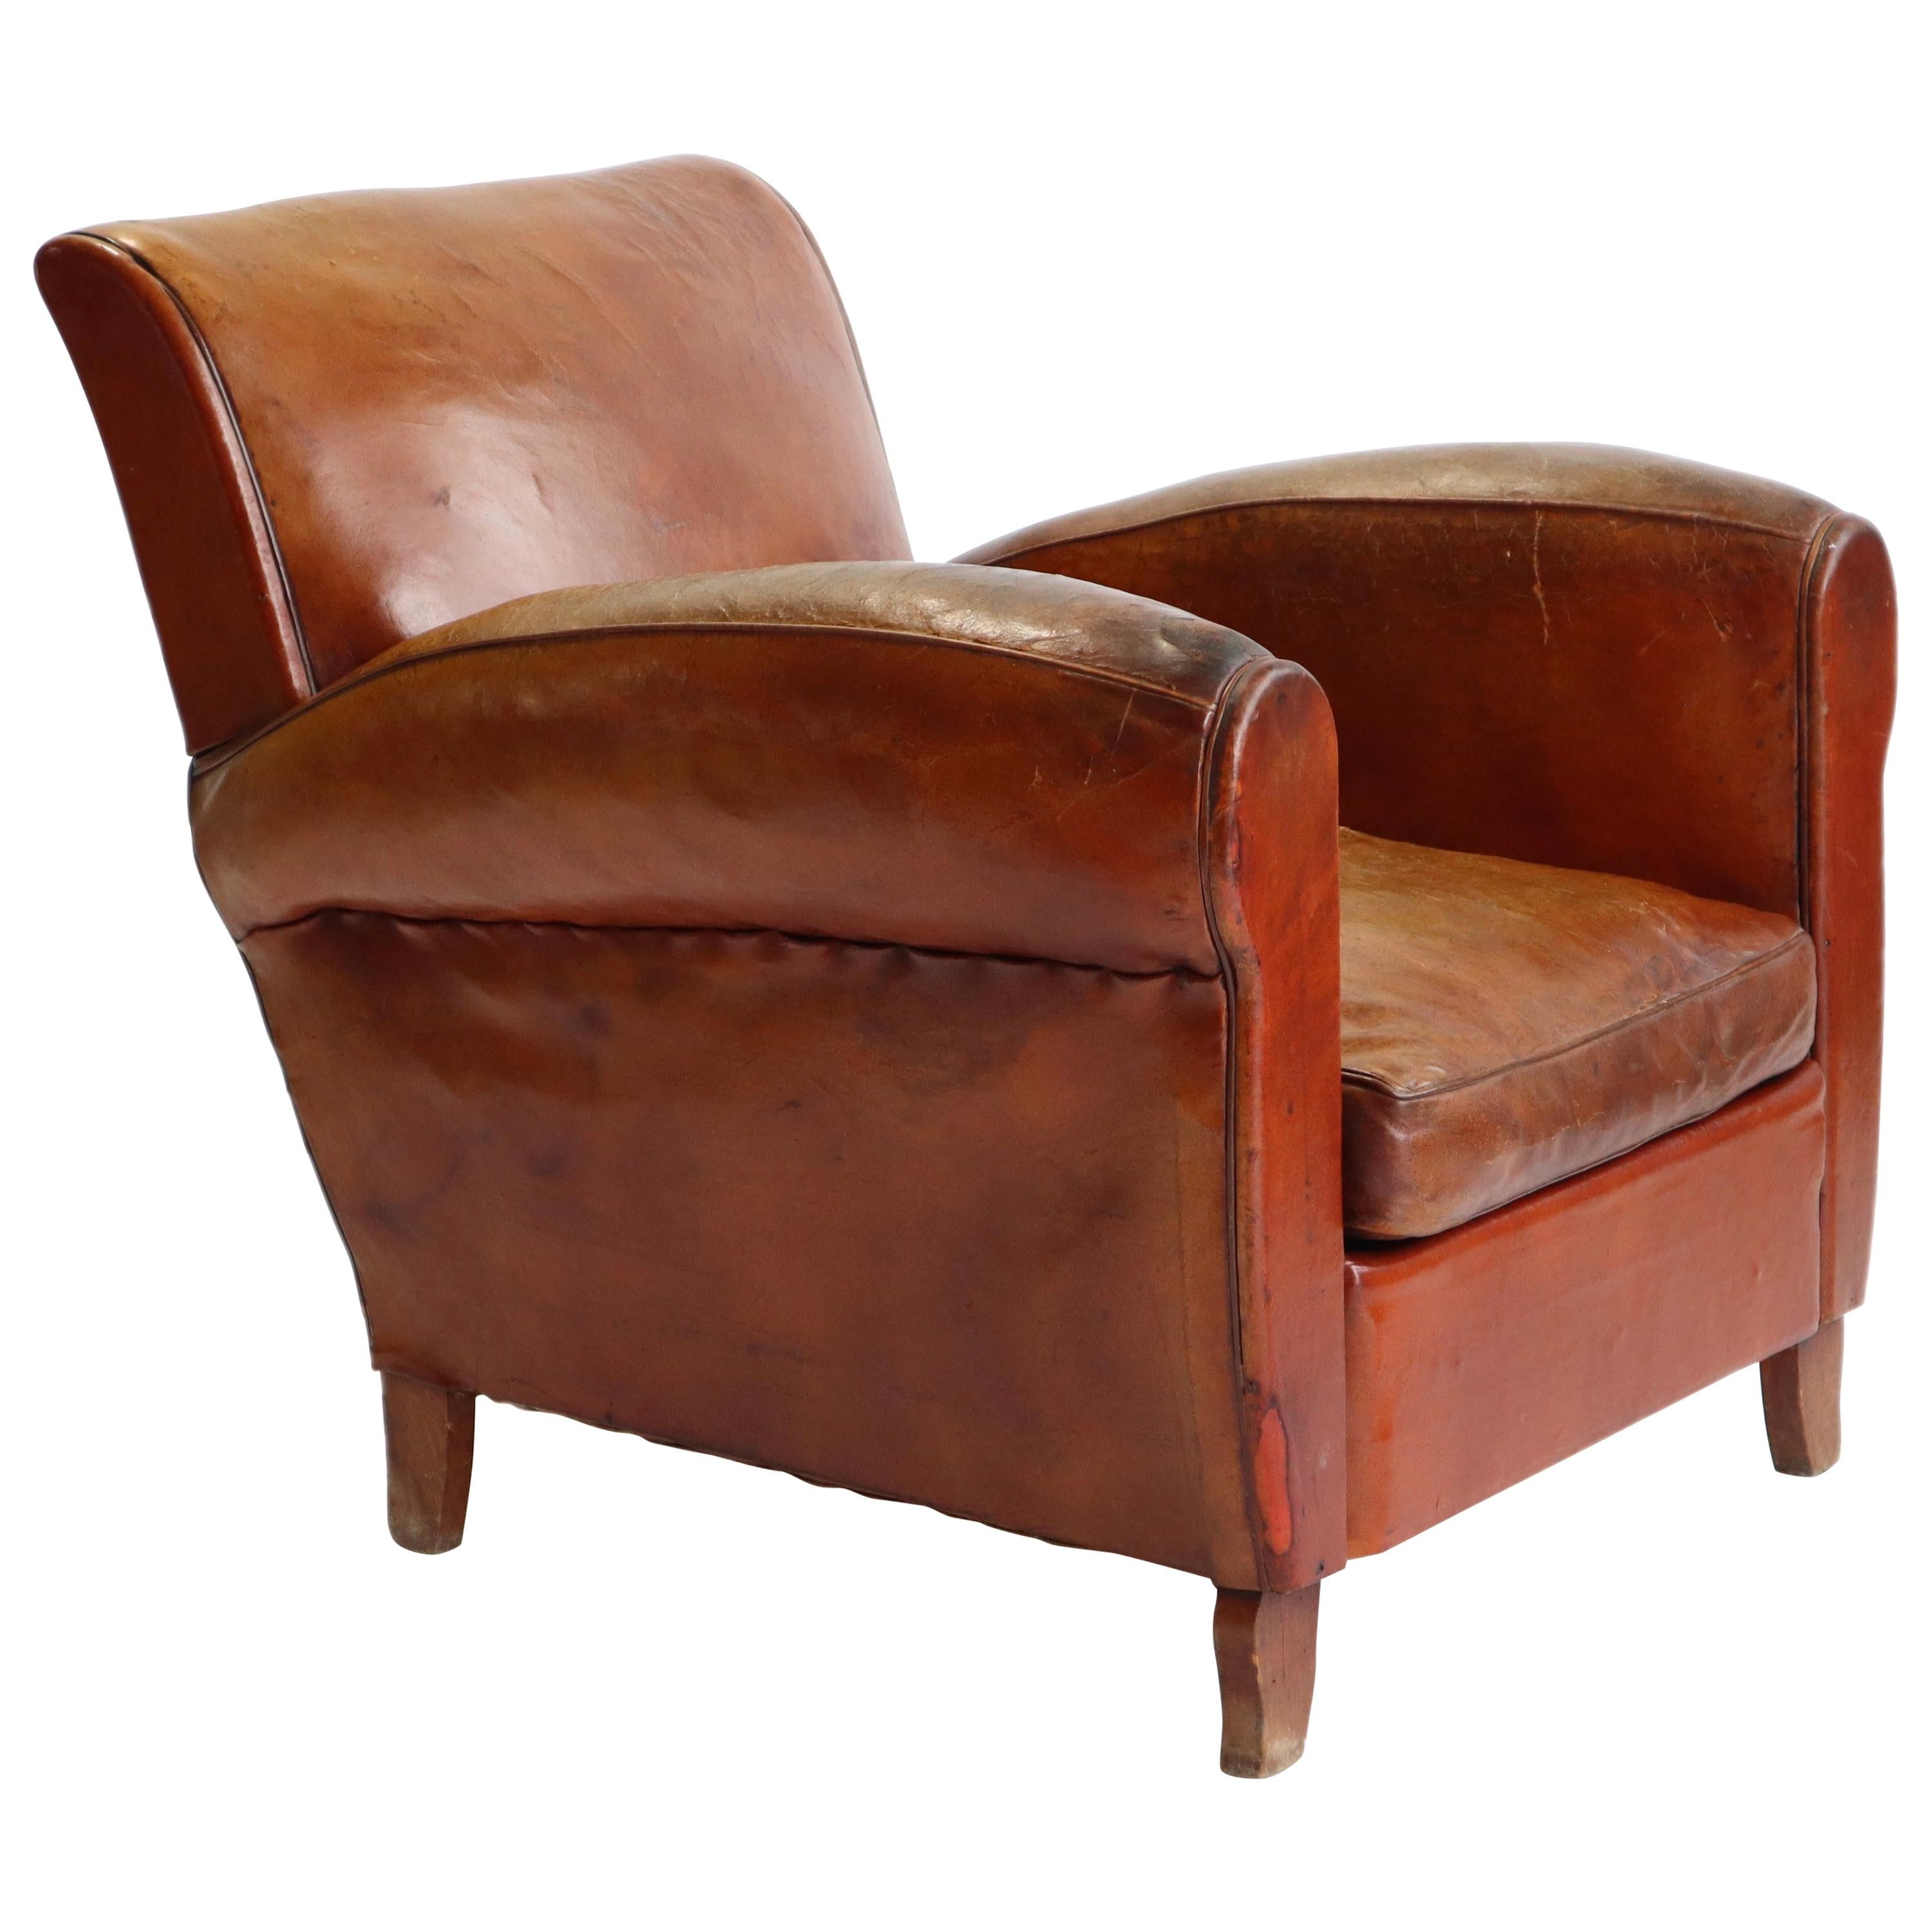 French Art Deco Leather Club Chair, 1940